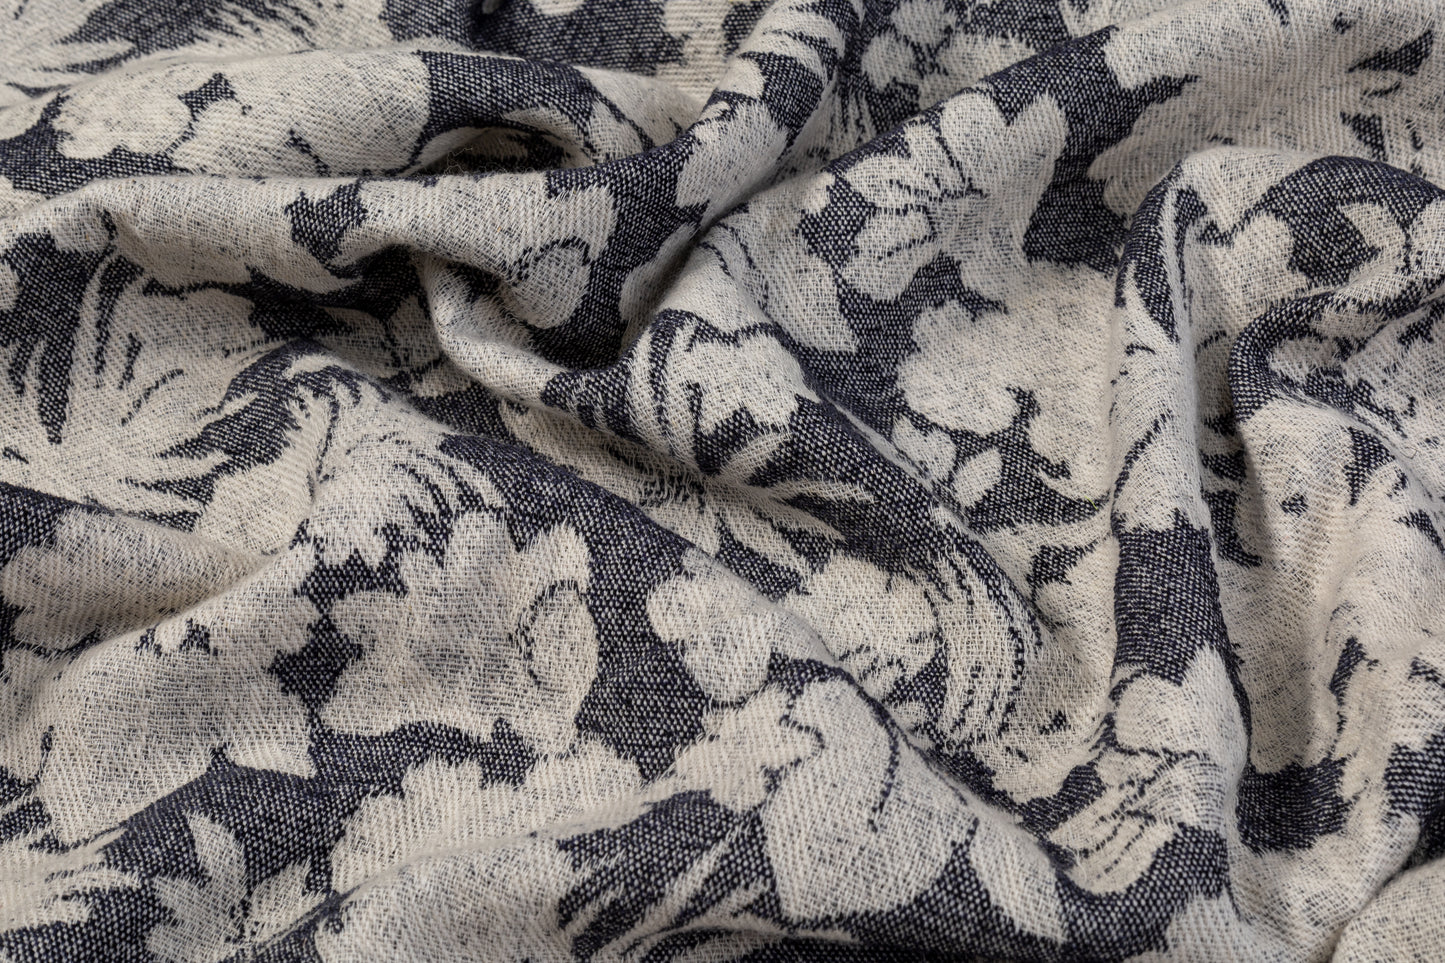 Double Faced Wool Rayon Jacquard - Navy / White / Light Beige